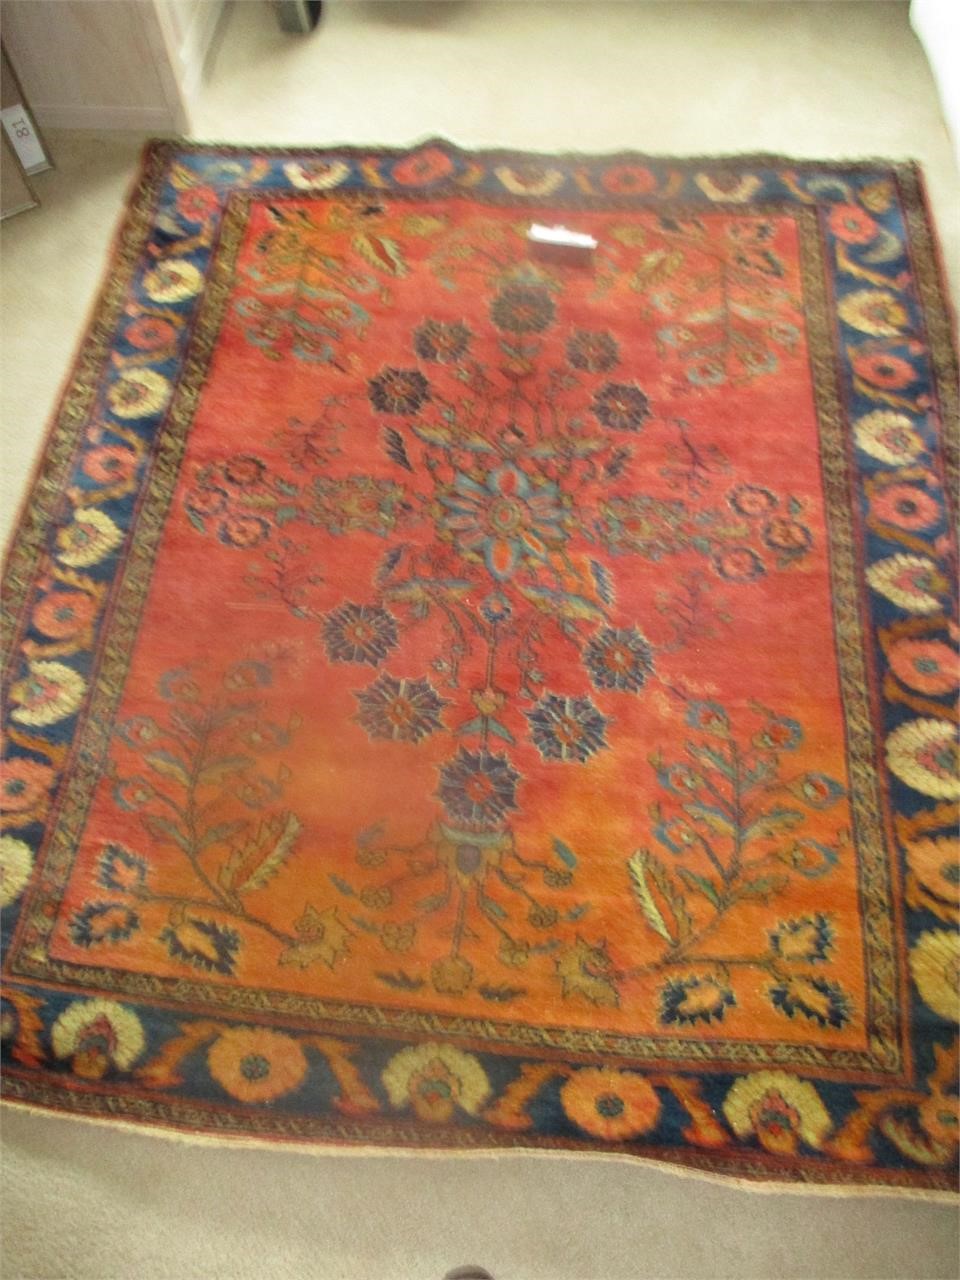 Rug-Faded on one side